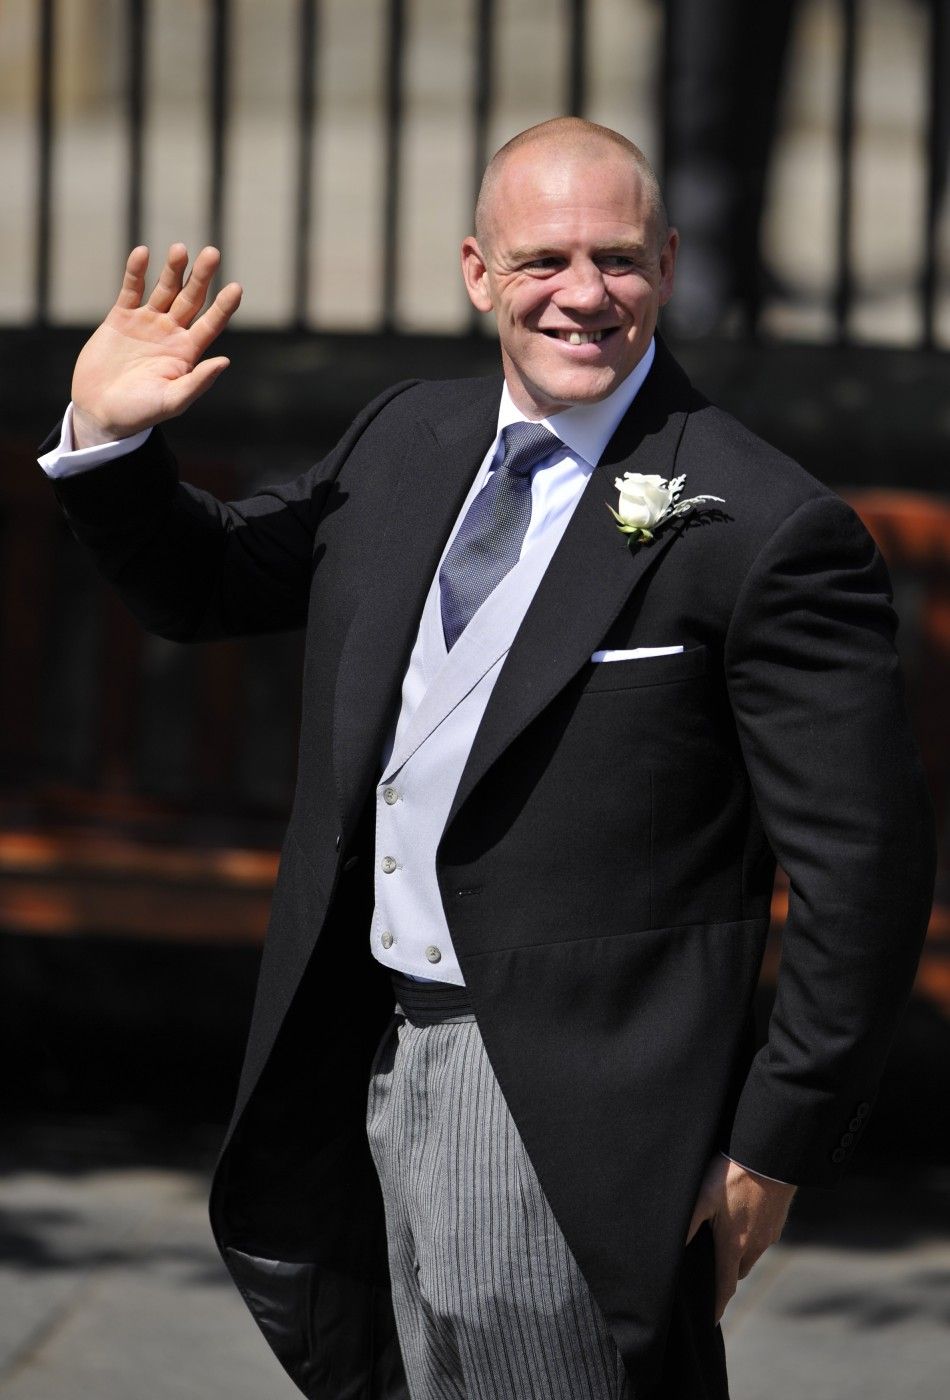 England rugby captain Mike Tindall arrives his wedding to Britains Zara Phillips, the eldest granddaughter of Queen Elizabeth, at Canongate Kirk in Edinburgh